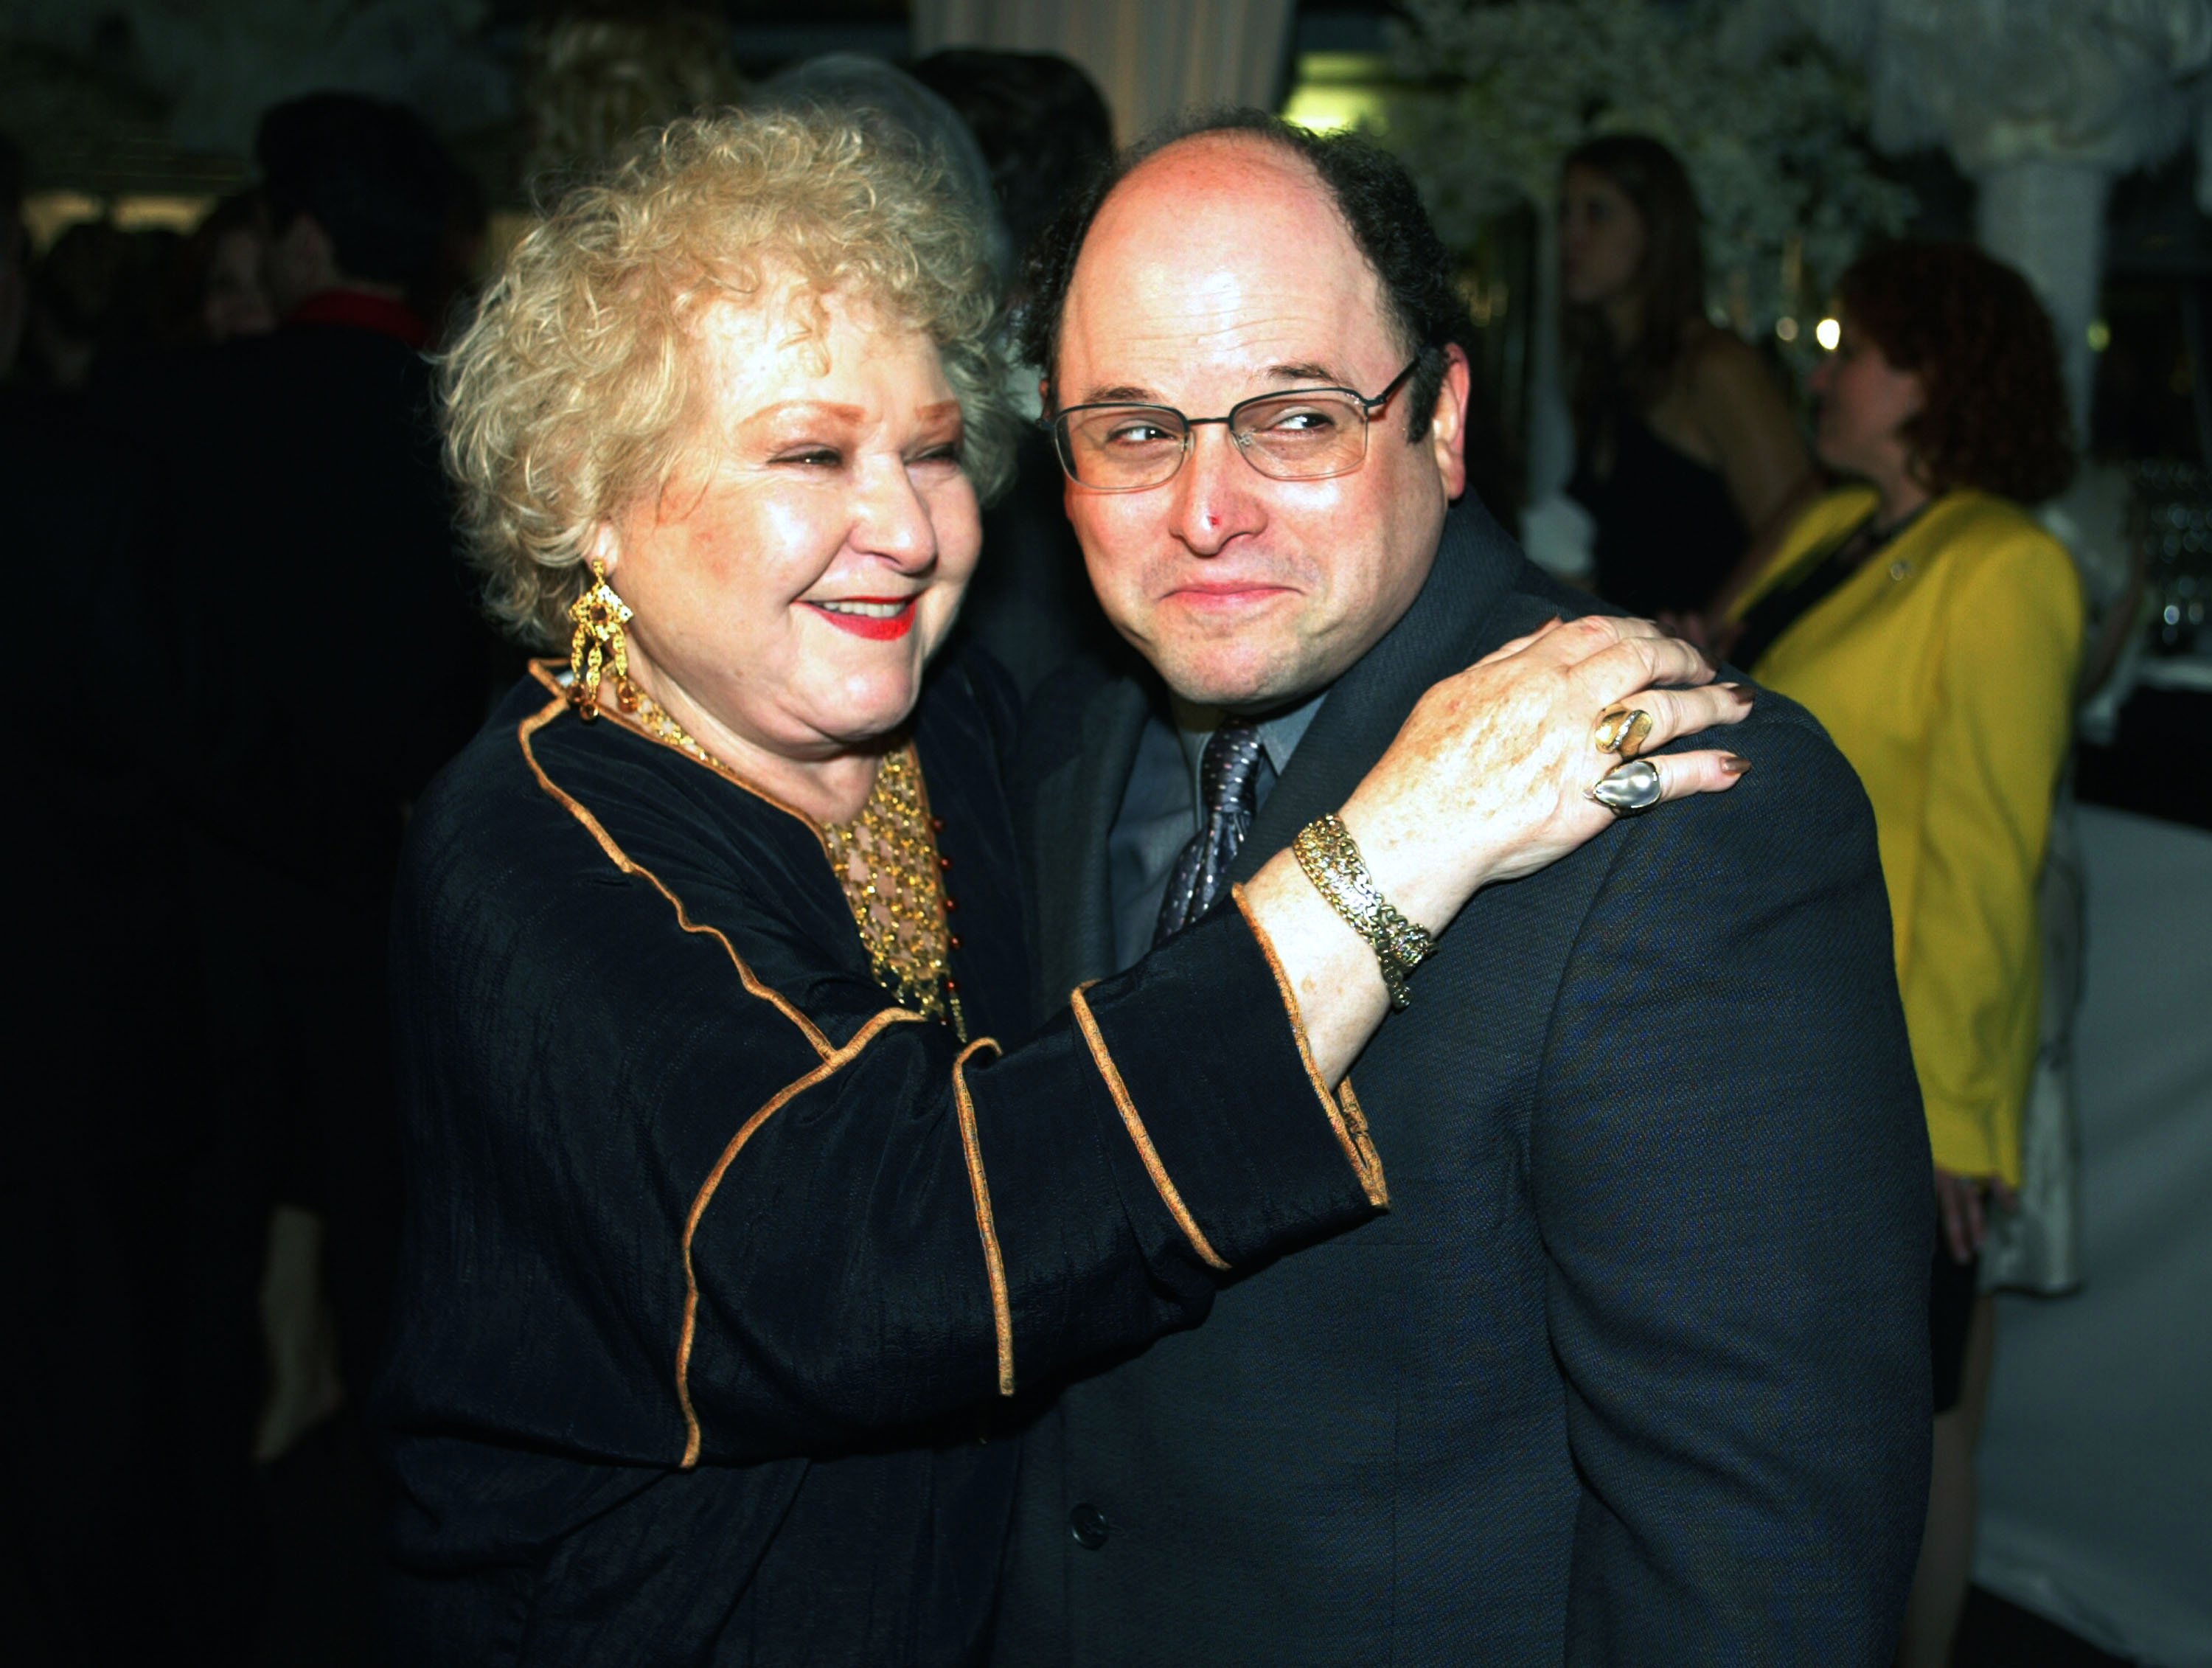 Actress Estelle Harris and Jason Alexander at the after-party for "The Producers" at the Hollywood Palladium on May 29, 2003 in Los Angeles, California. | Source: Kevin Winter/Getty Images